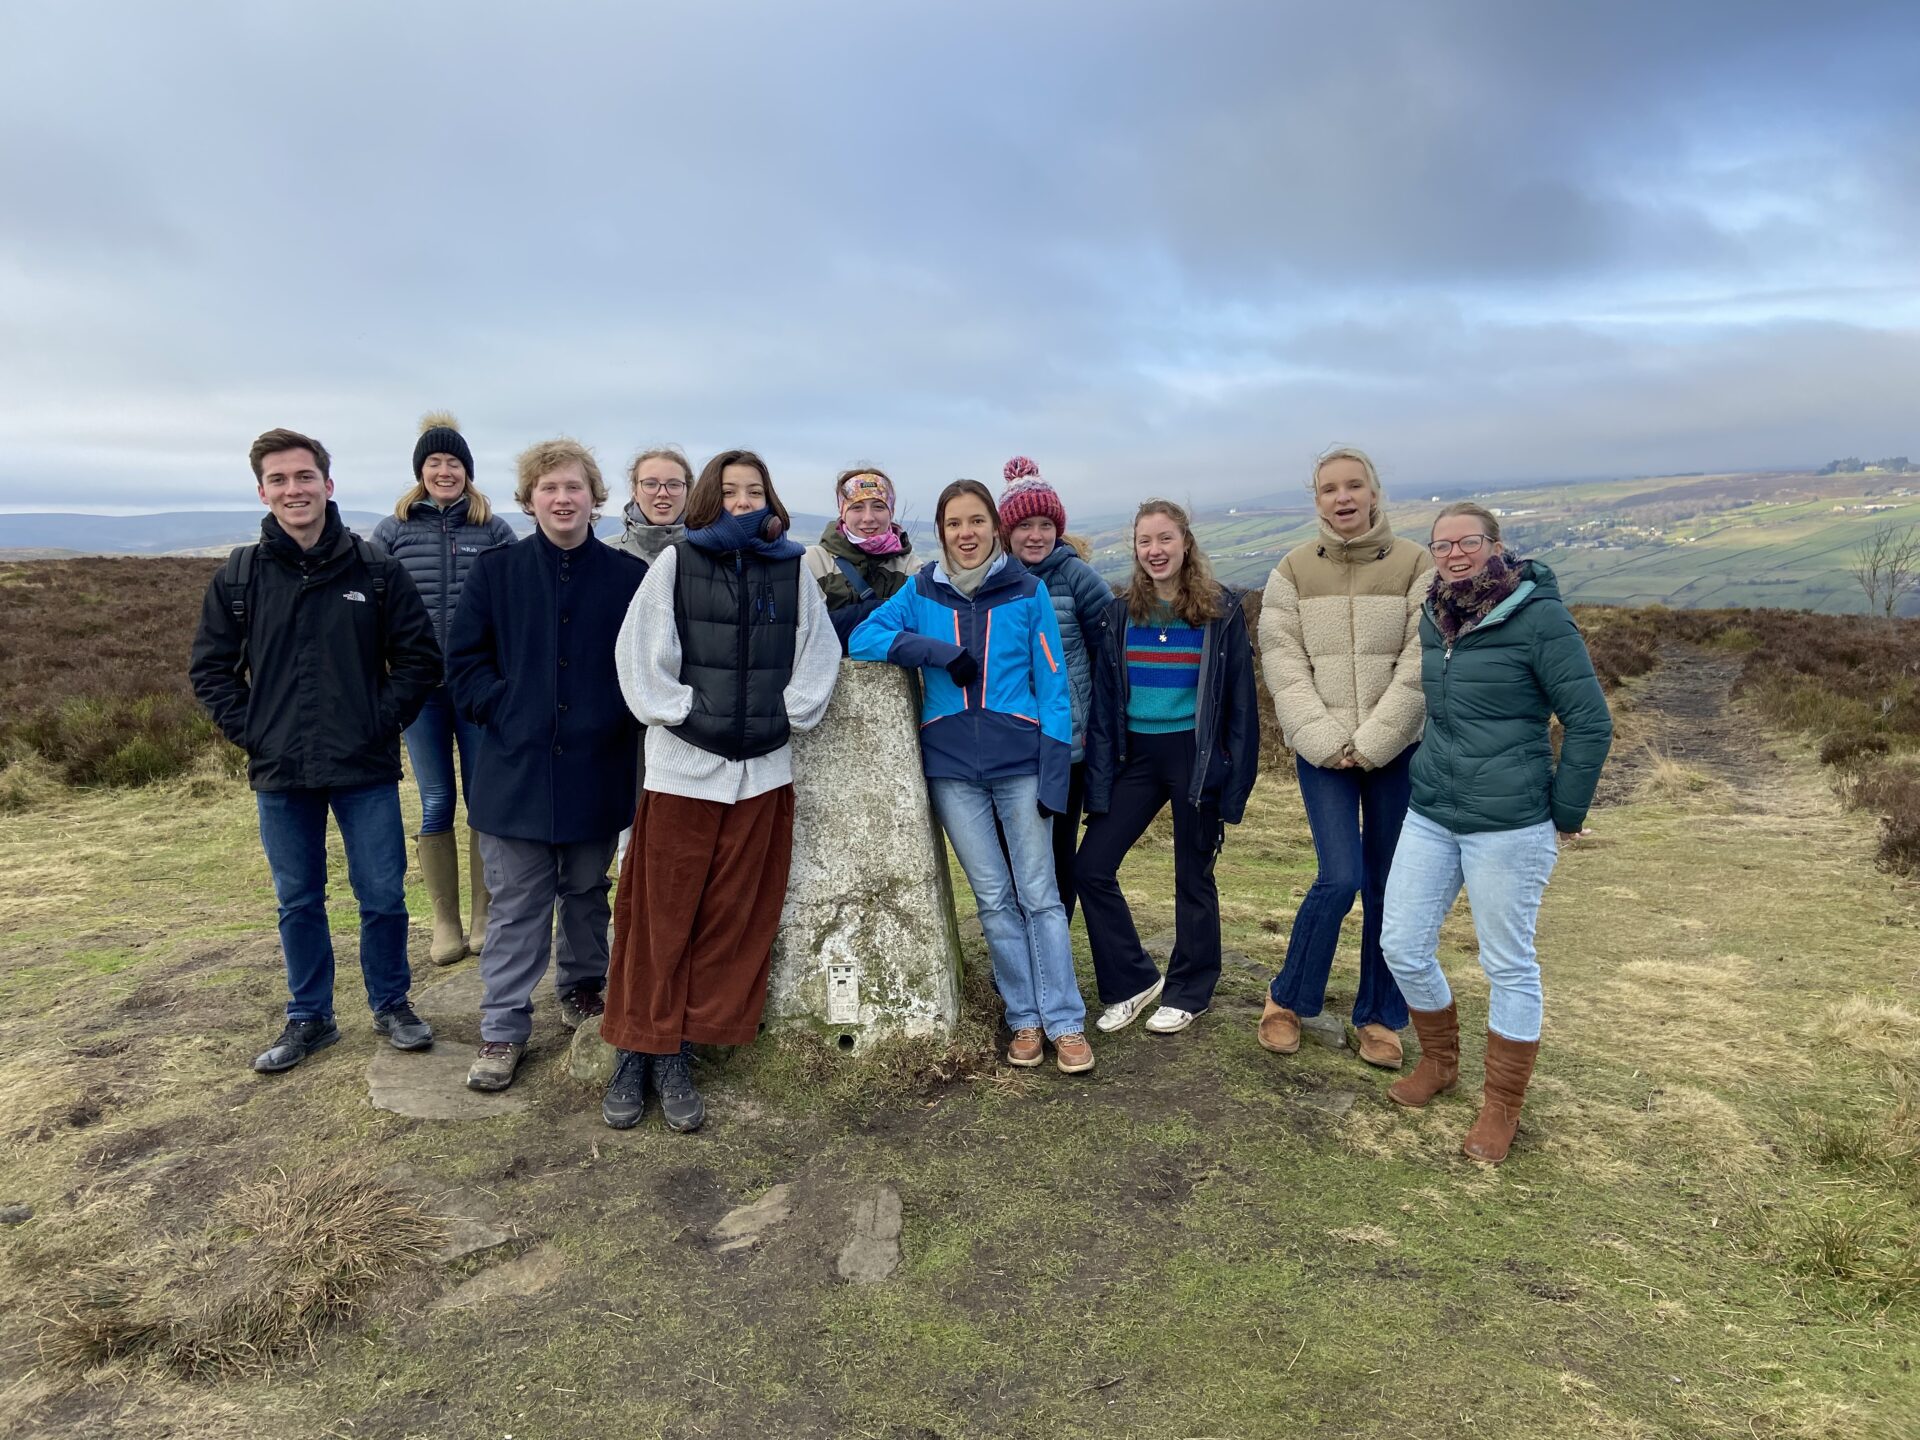 Year 12 and 13 Literature students visited Haworth